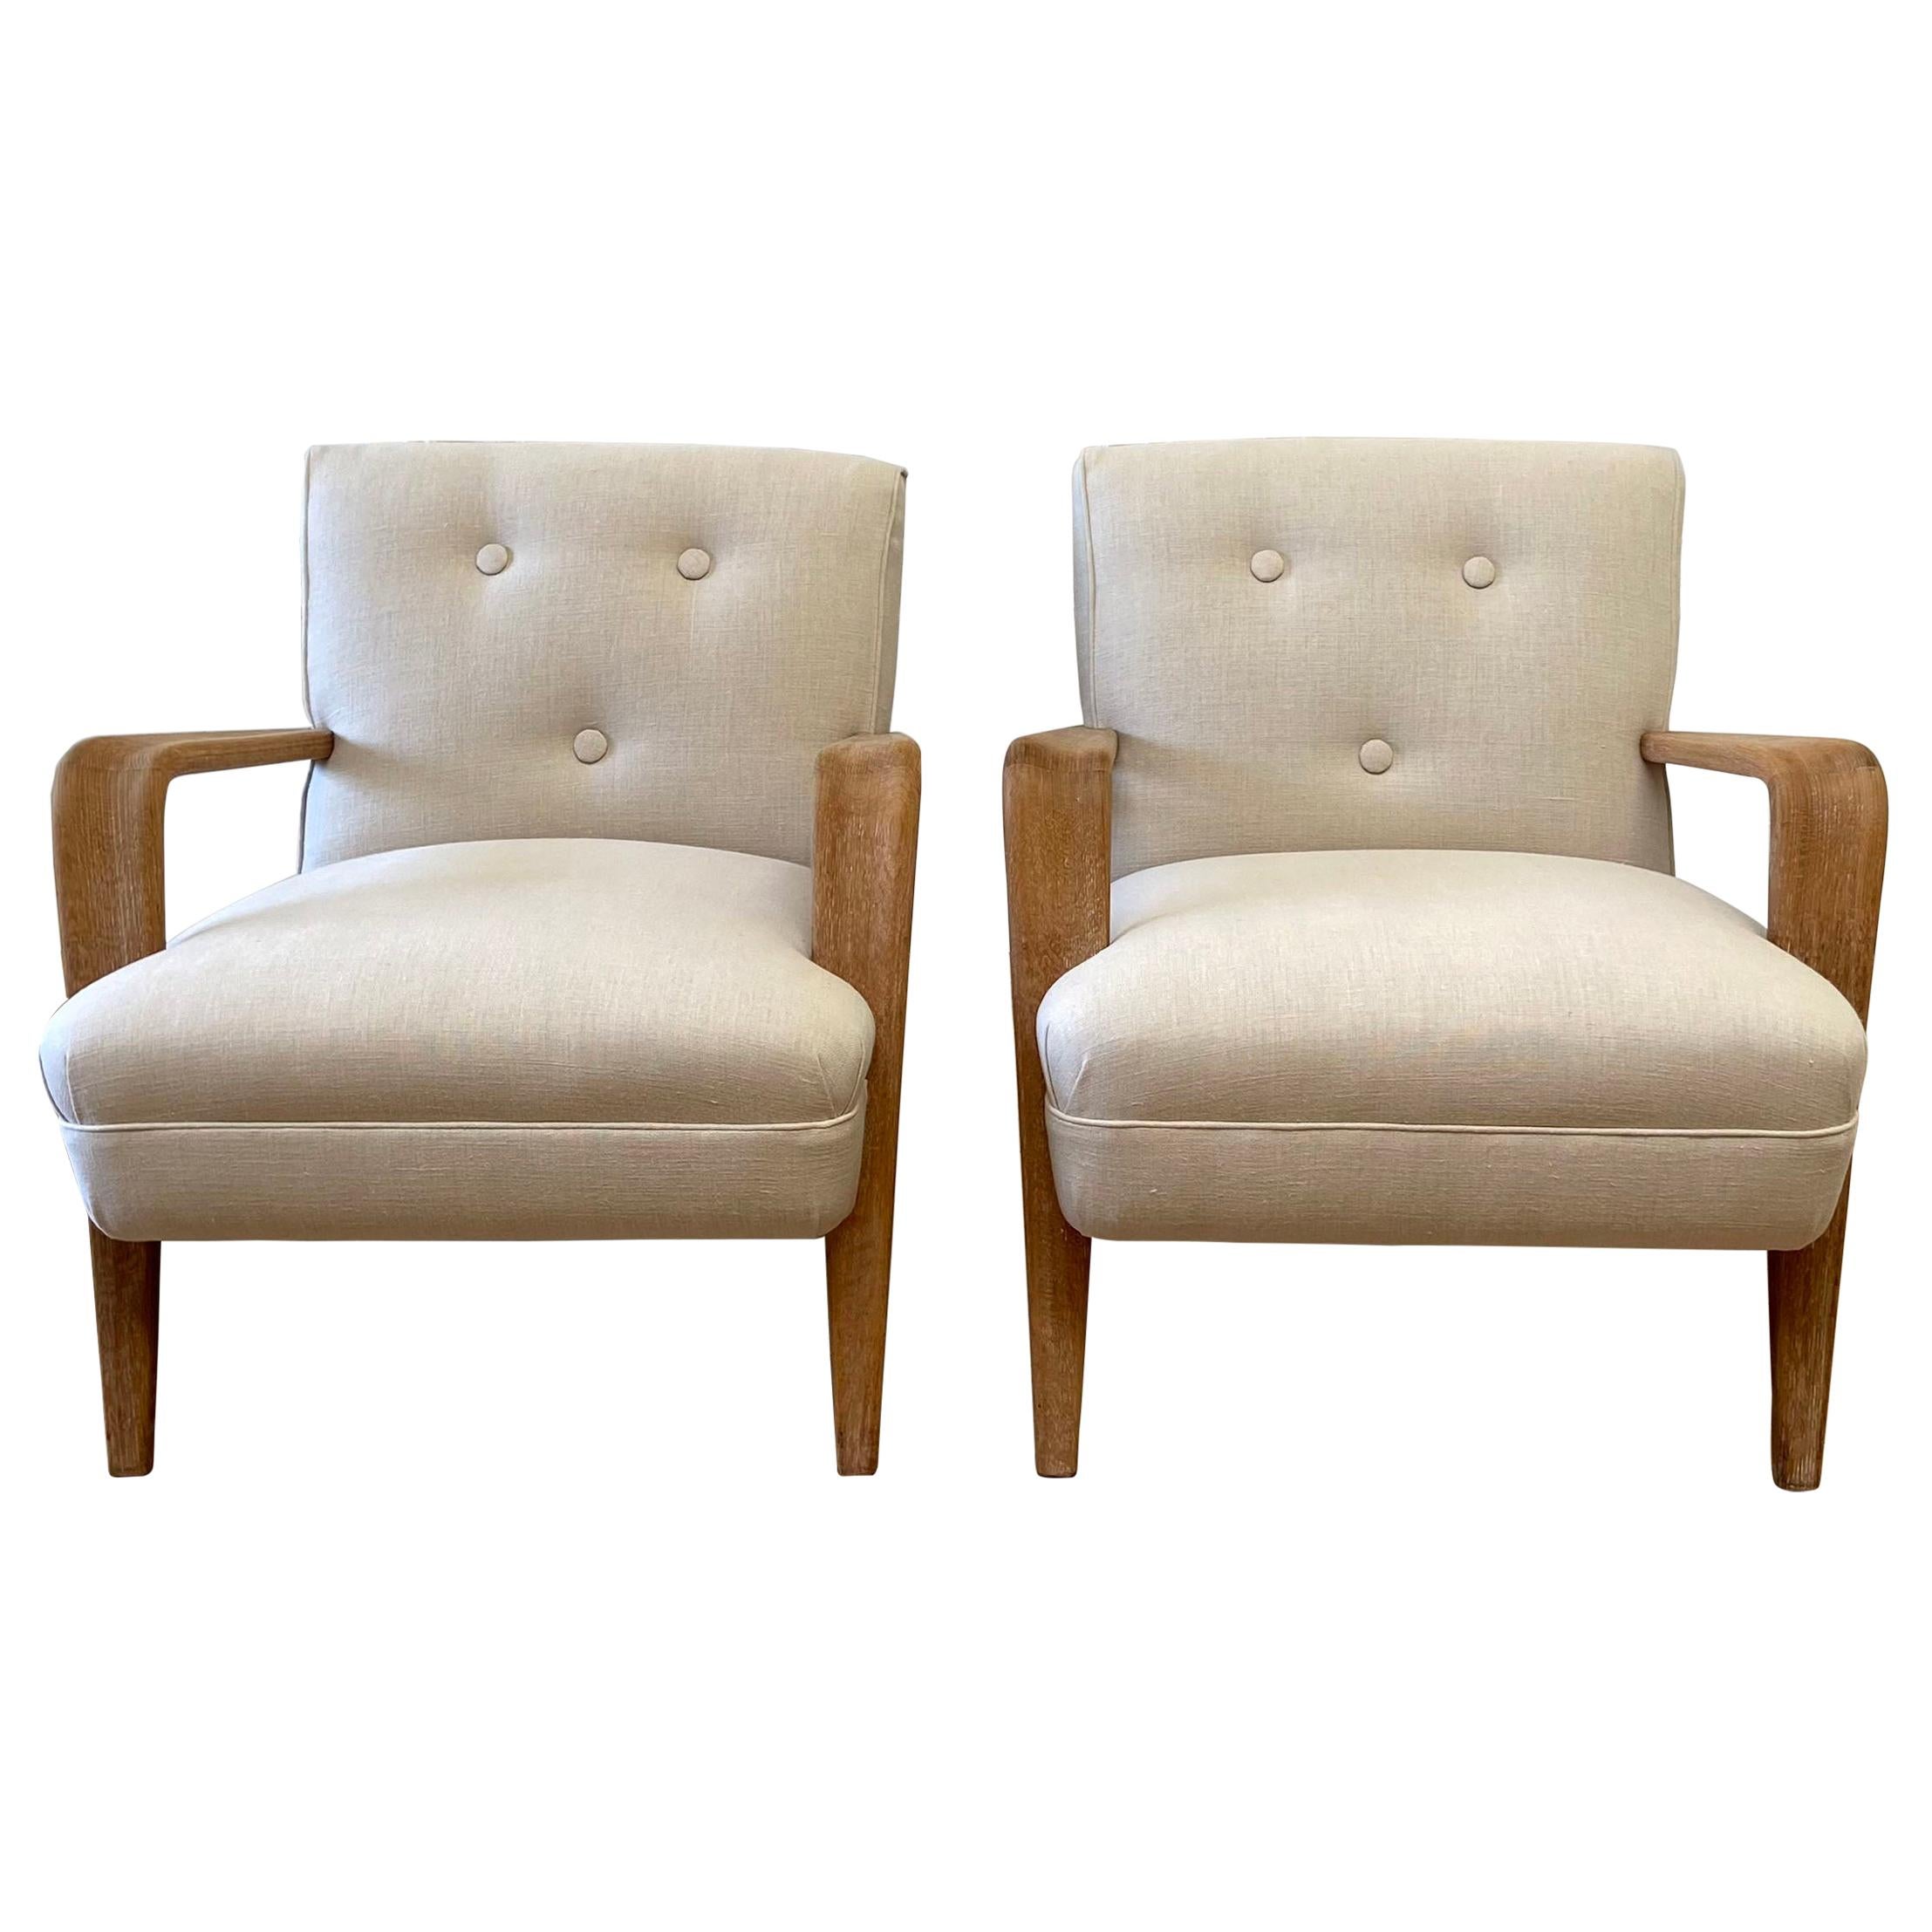 Pair of Vintage Mid-Century Modern Upholstered Chairs with White Oak Frame